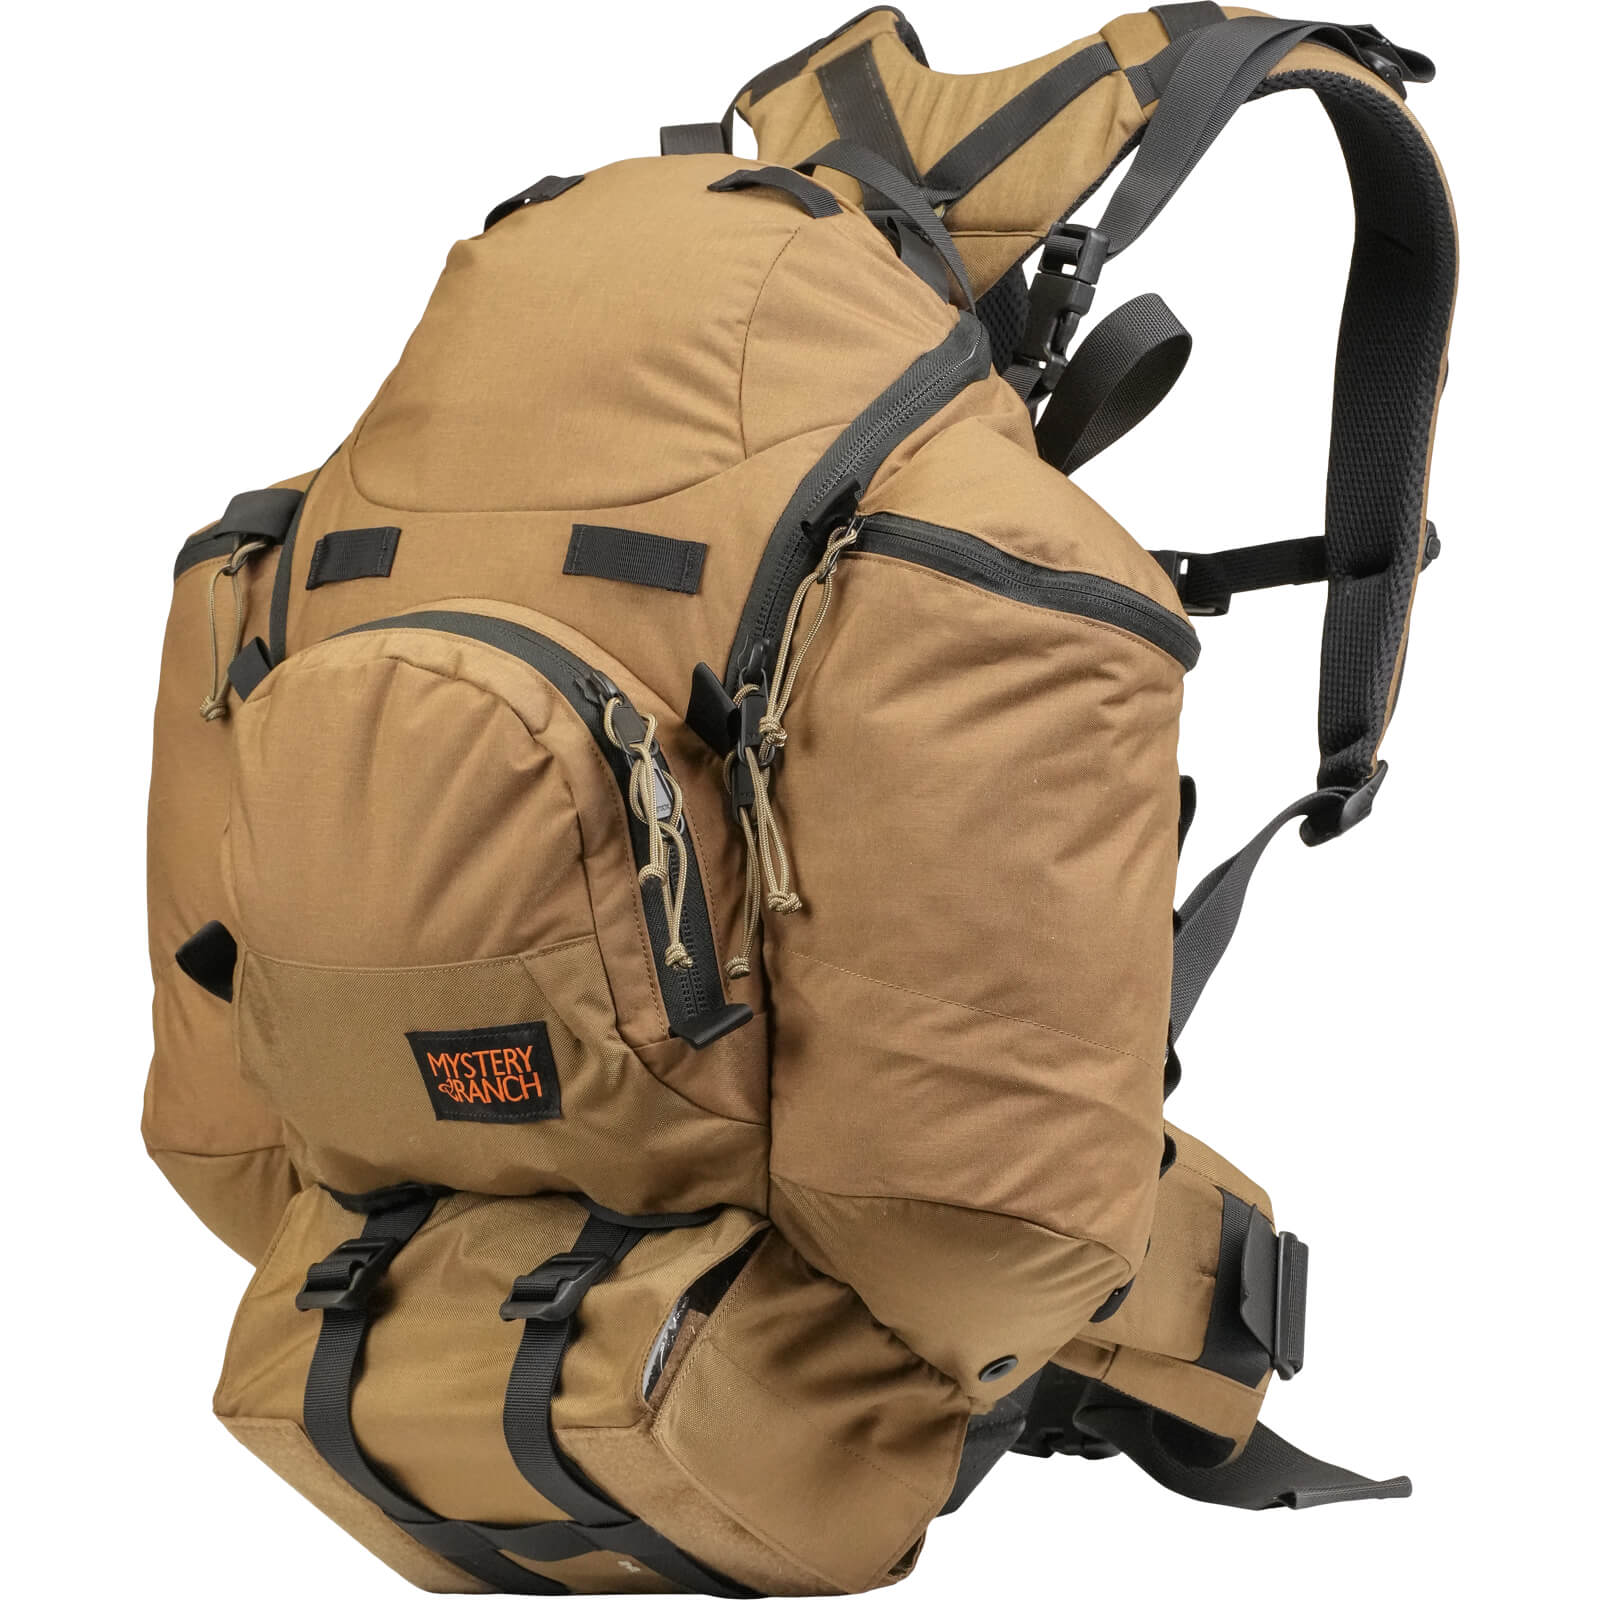 New Fire Packs | MYSTERY RANCH BACKPACKS